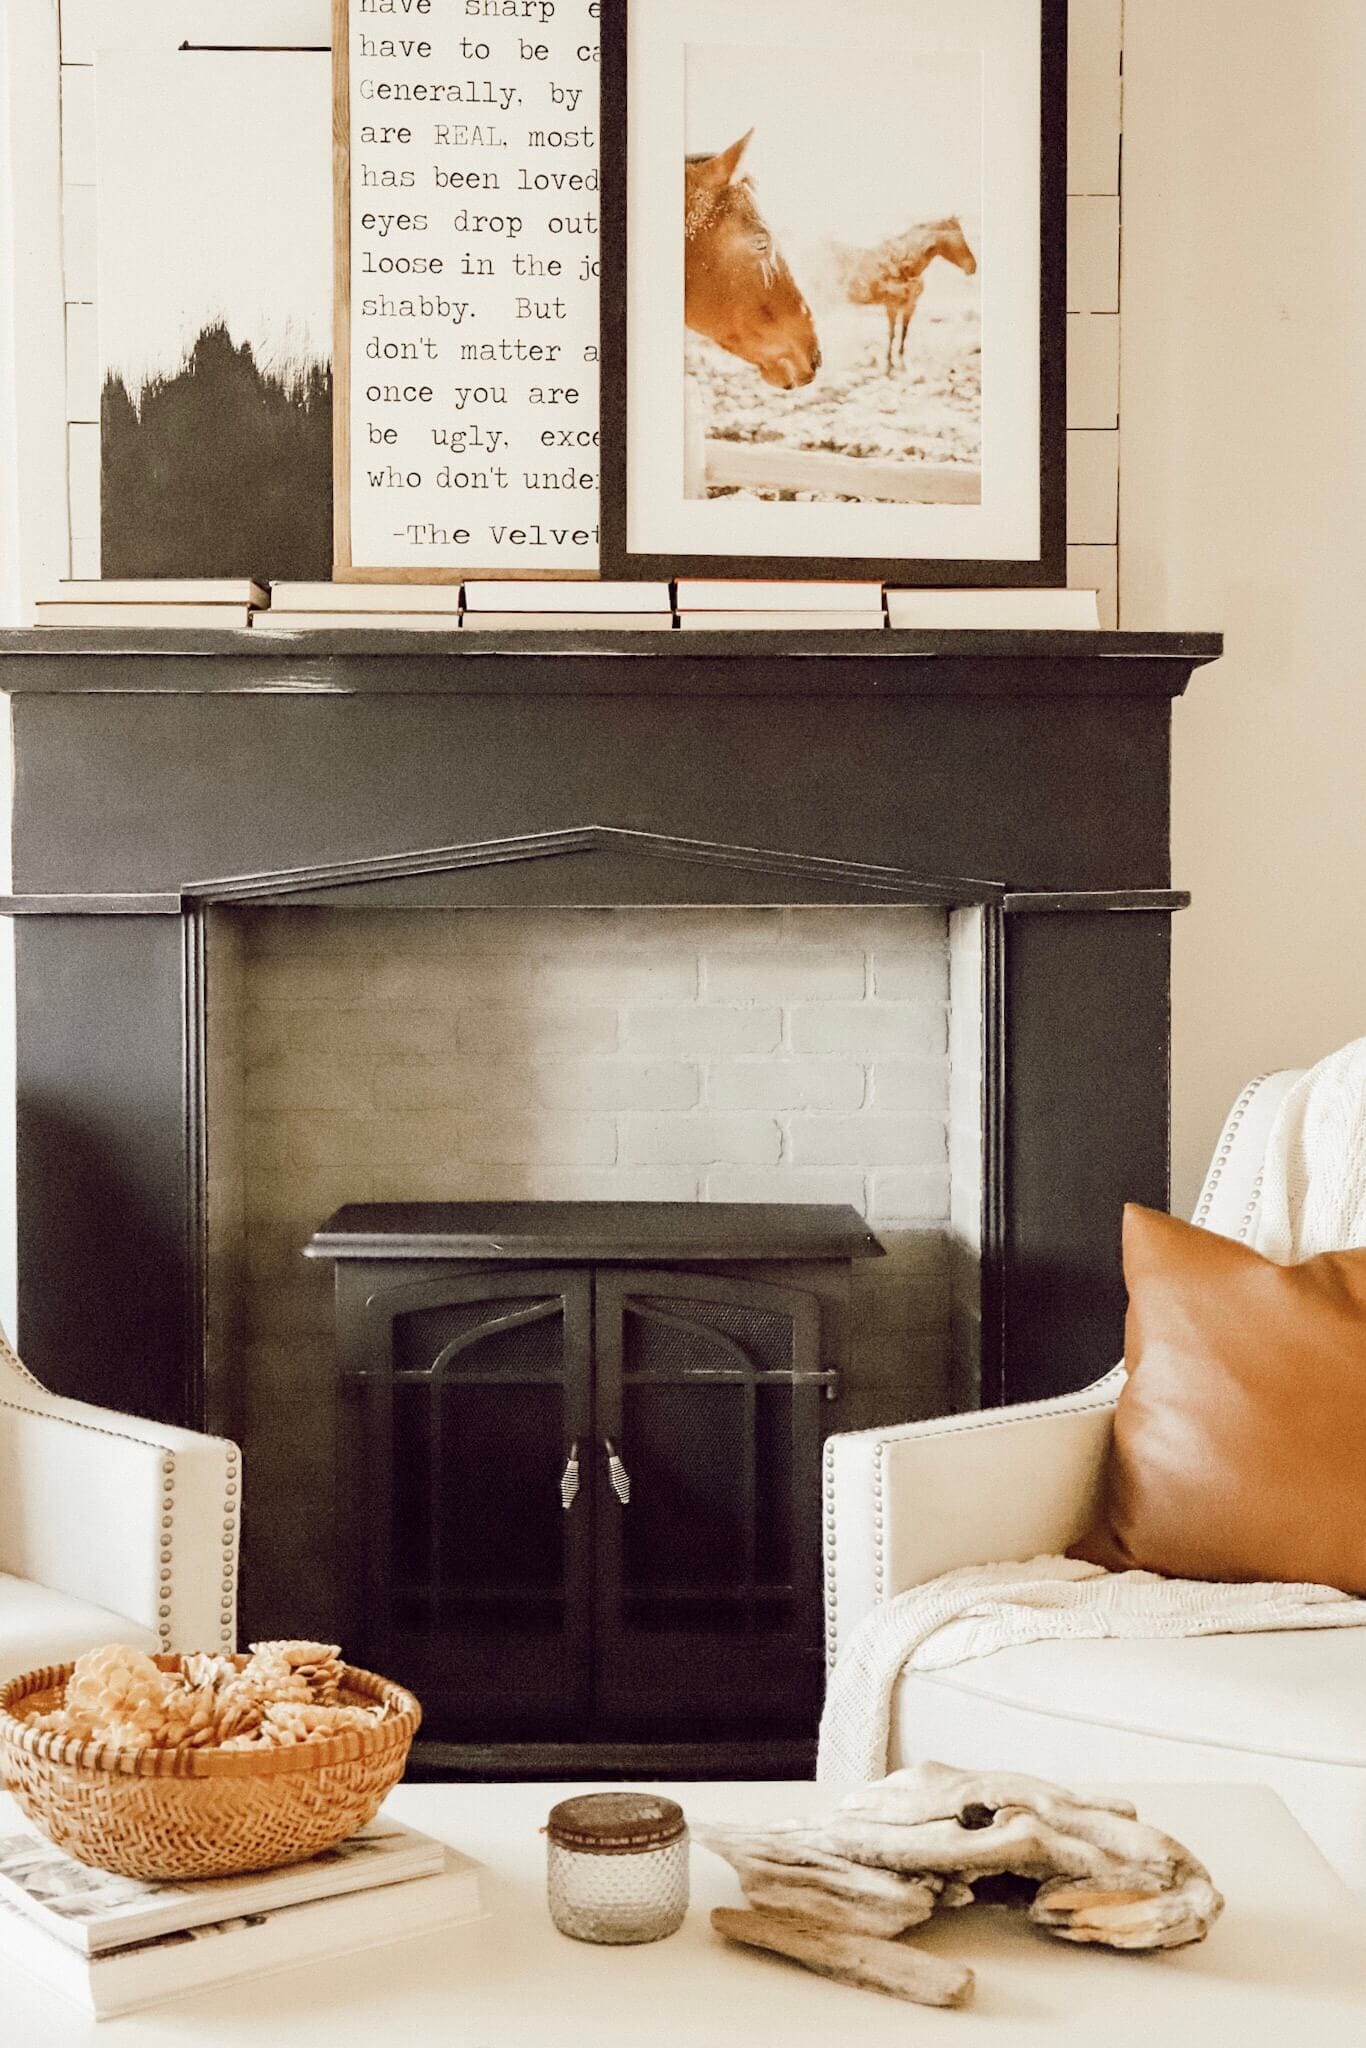 We updated out fireplace! Introducing our new painted fireplace in black! Such a showstopper!